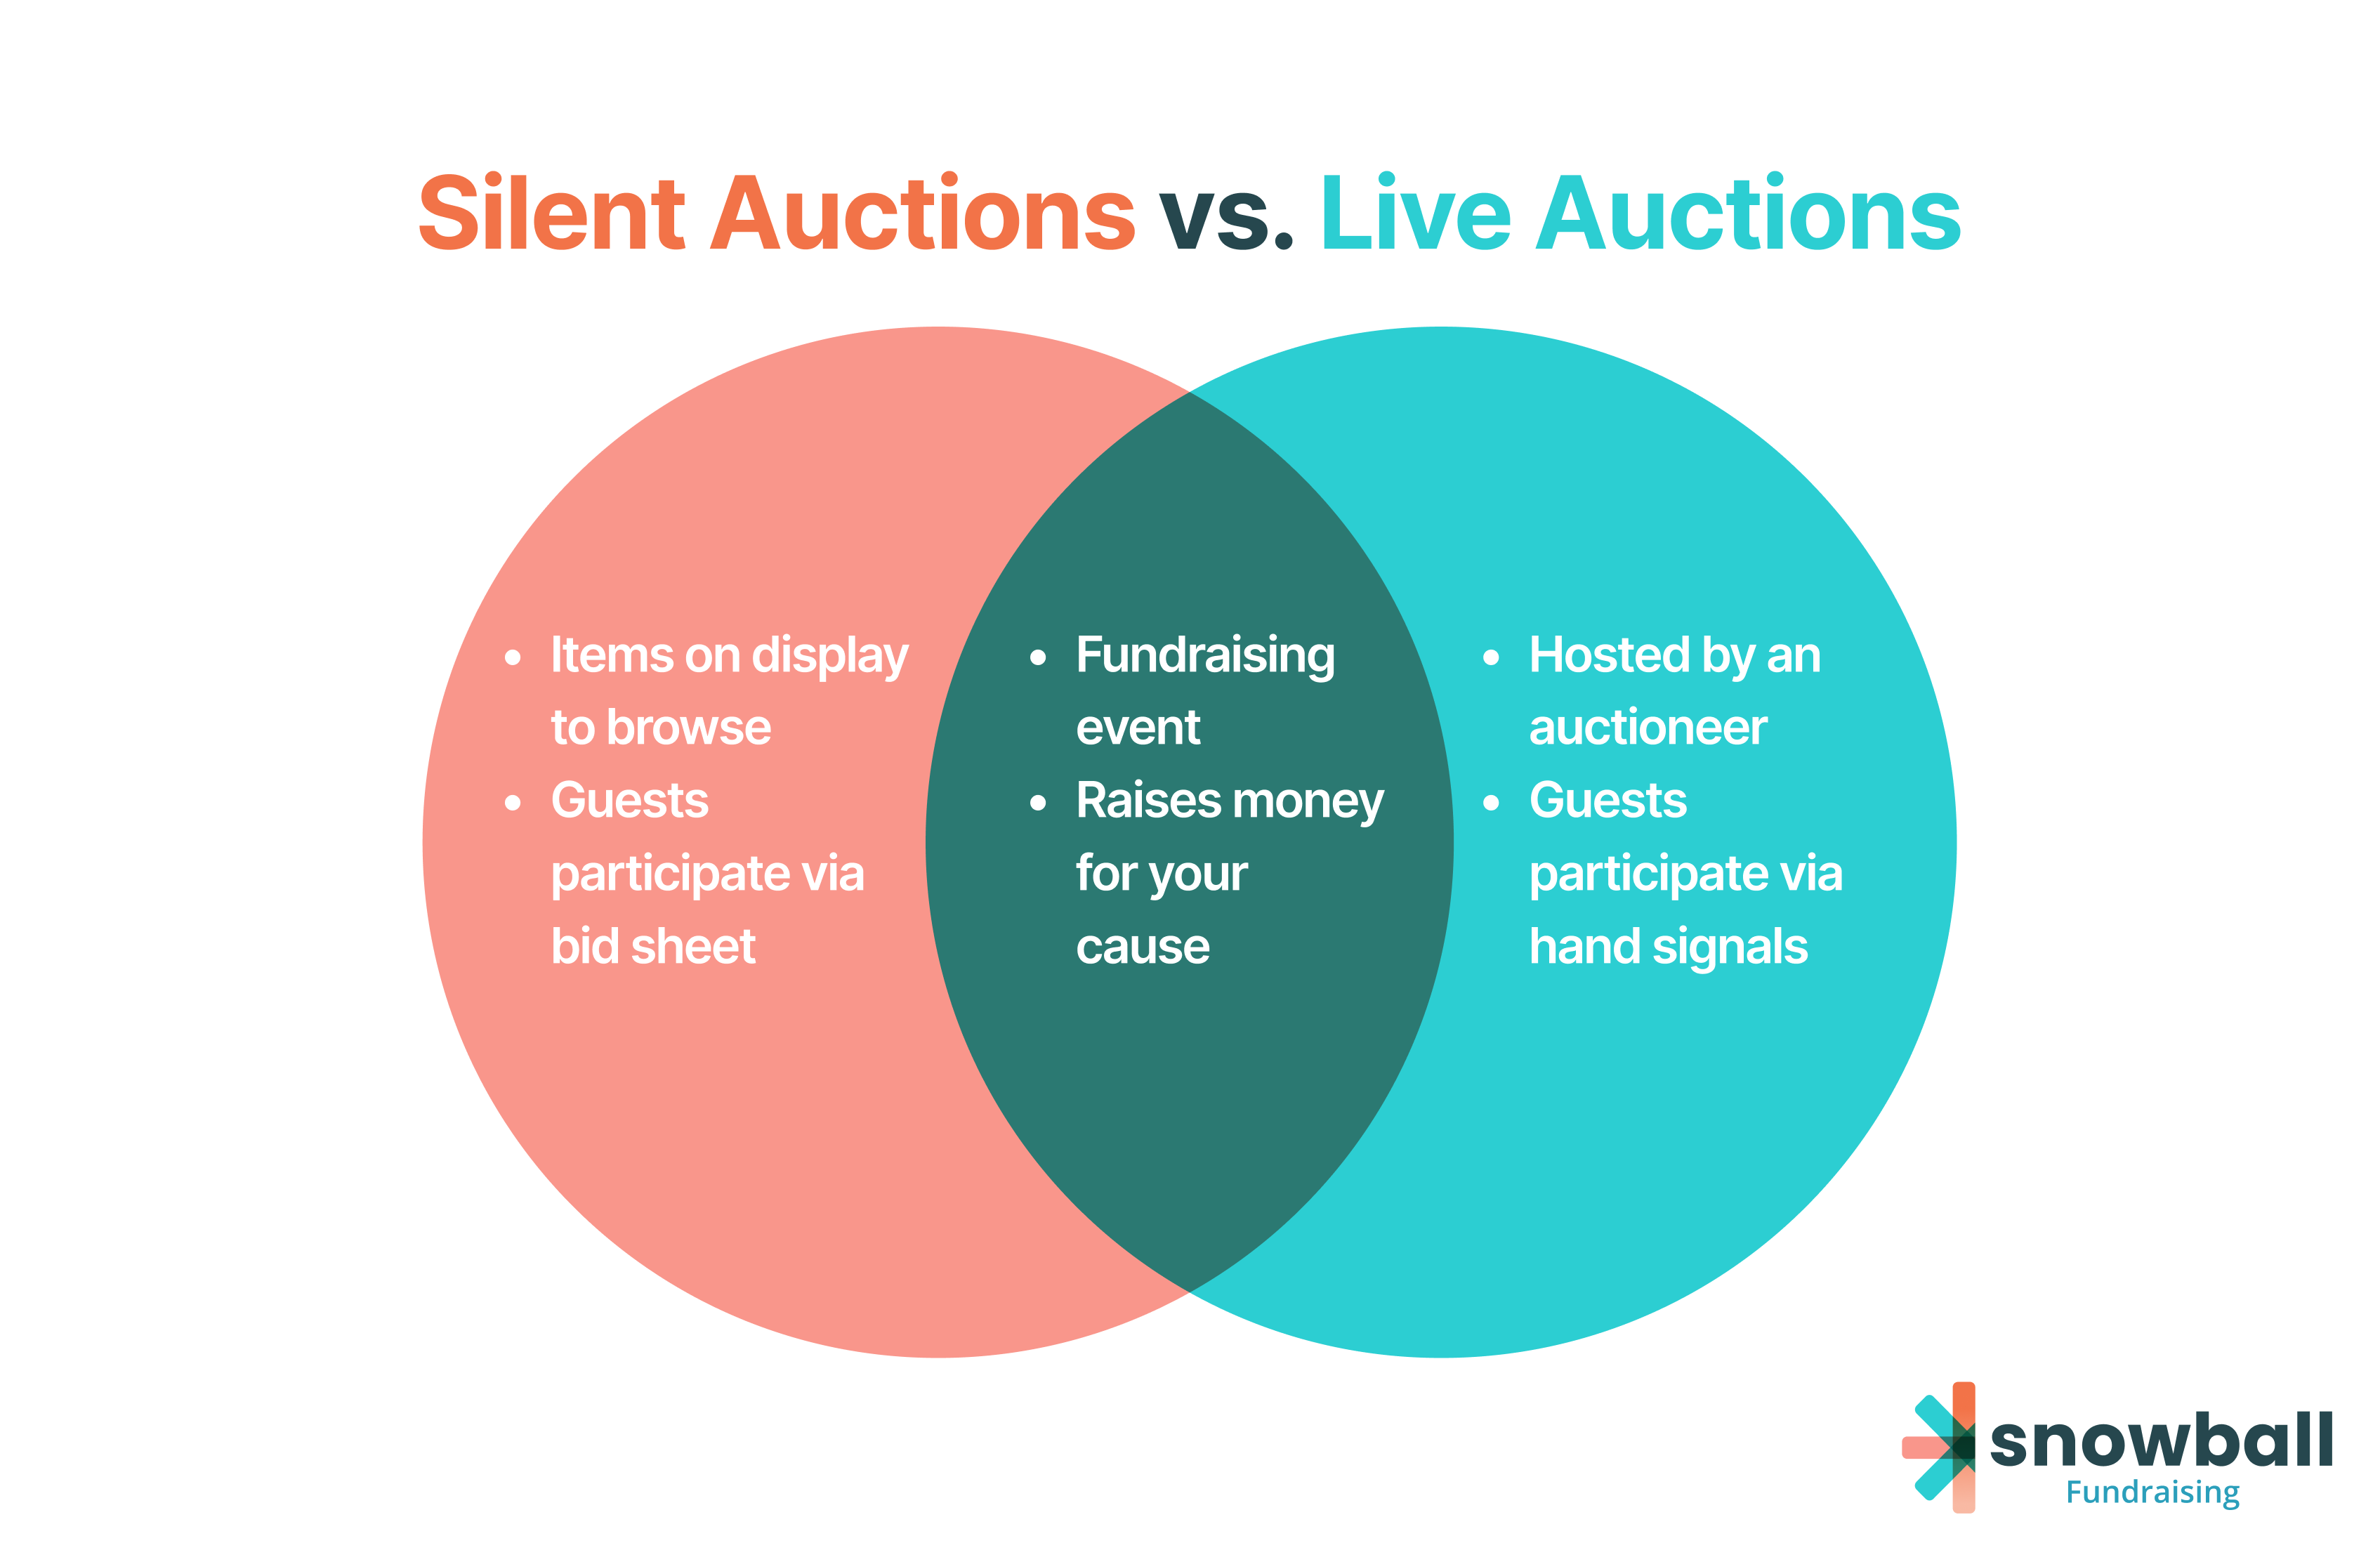 This image shows the differences between silent auctions and live auctions, which will be explained in the text below